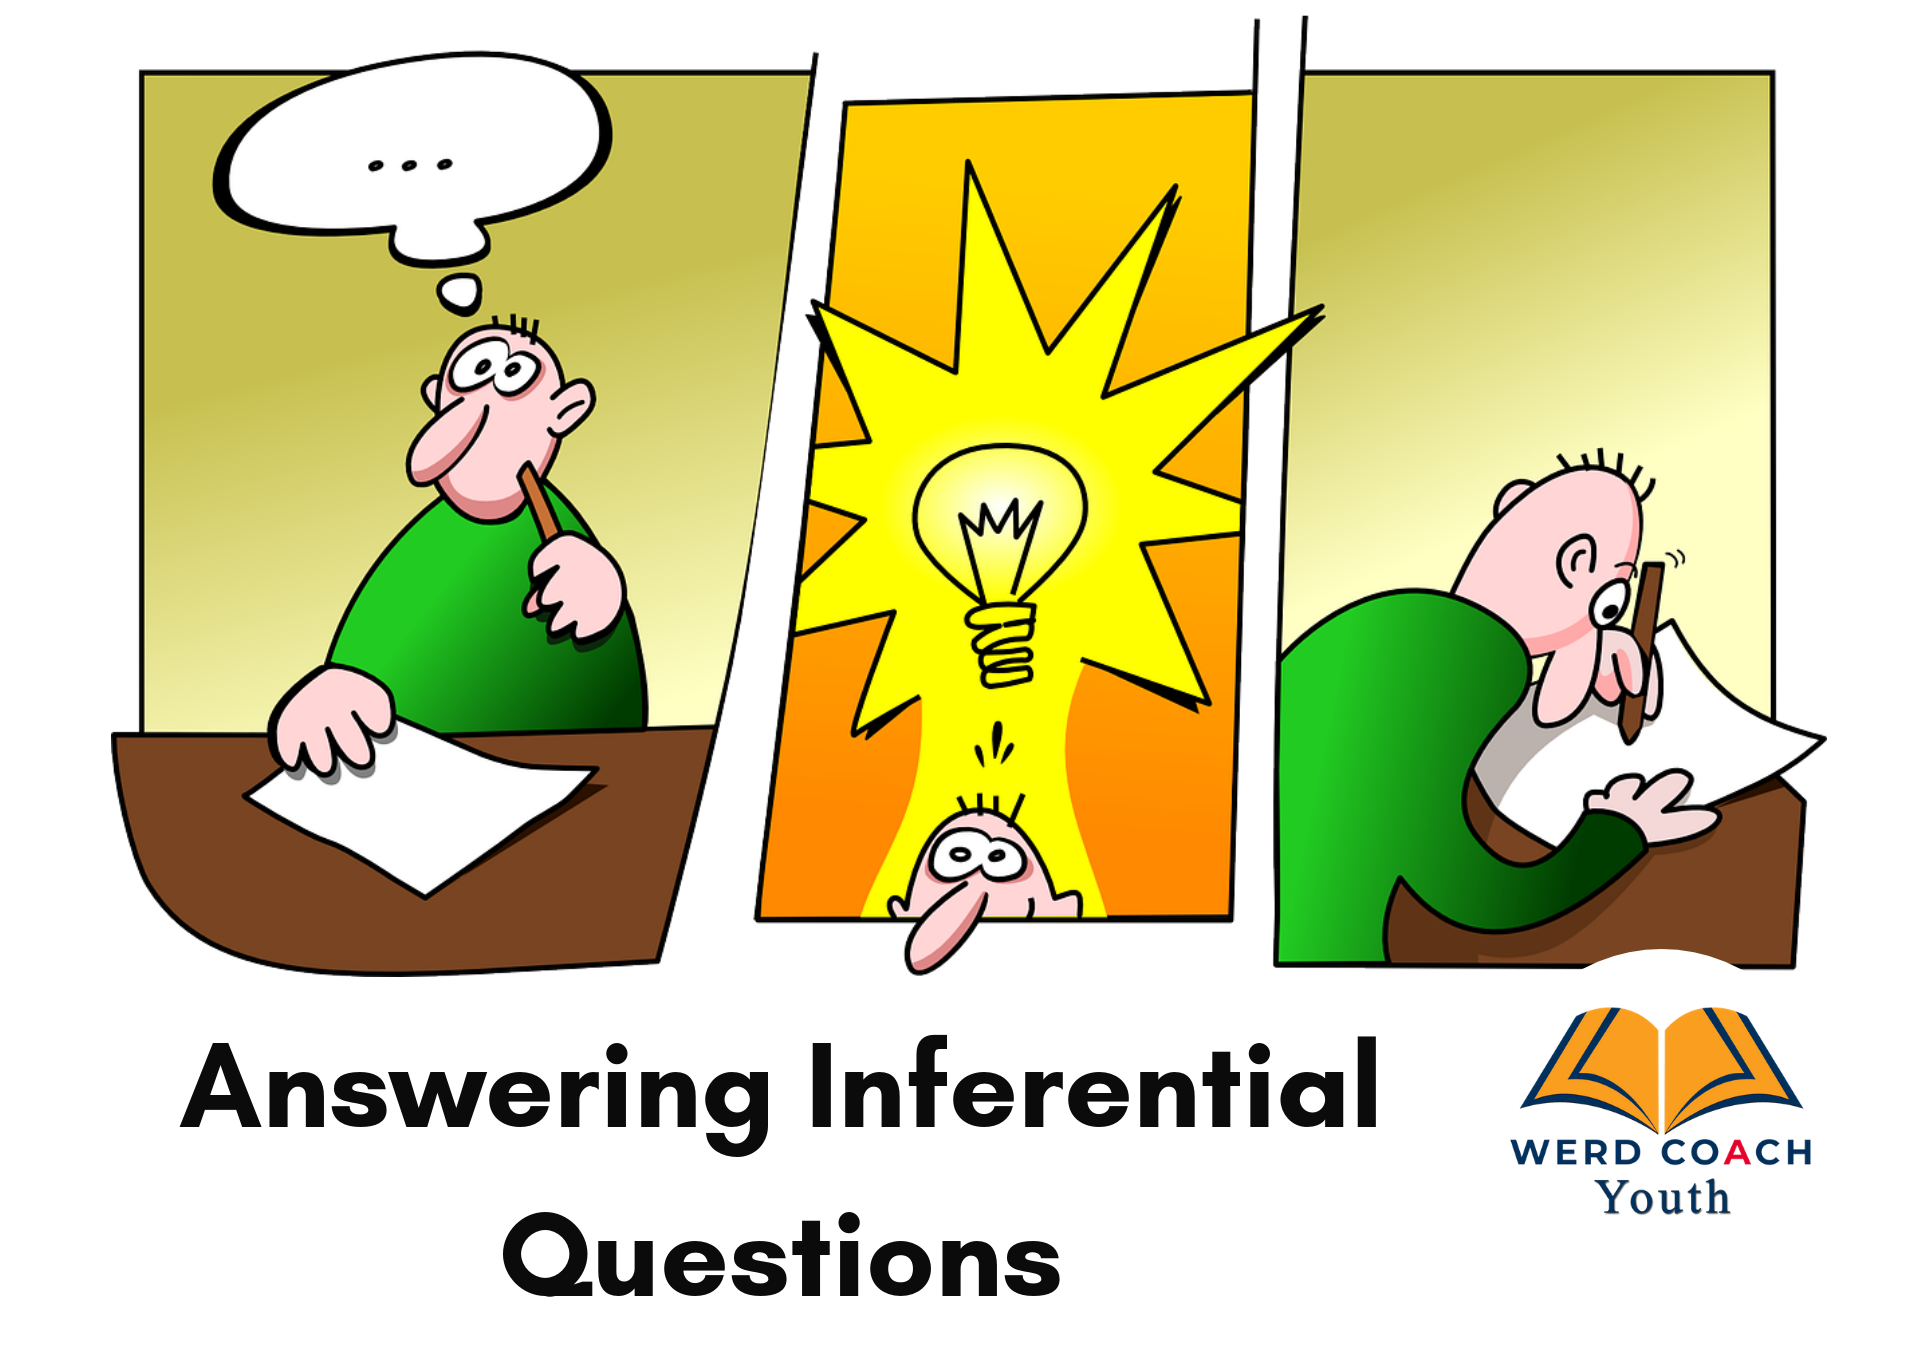 Answering Inferential Questions